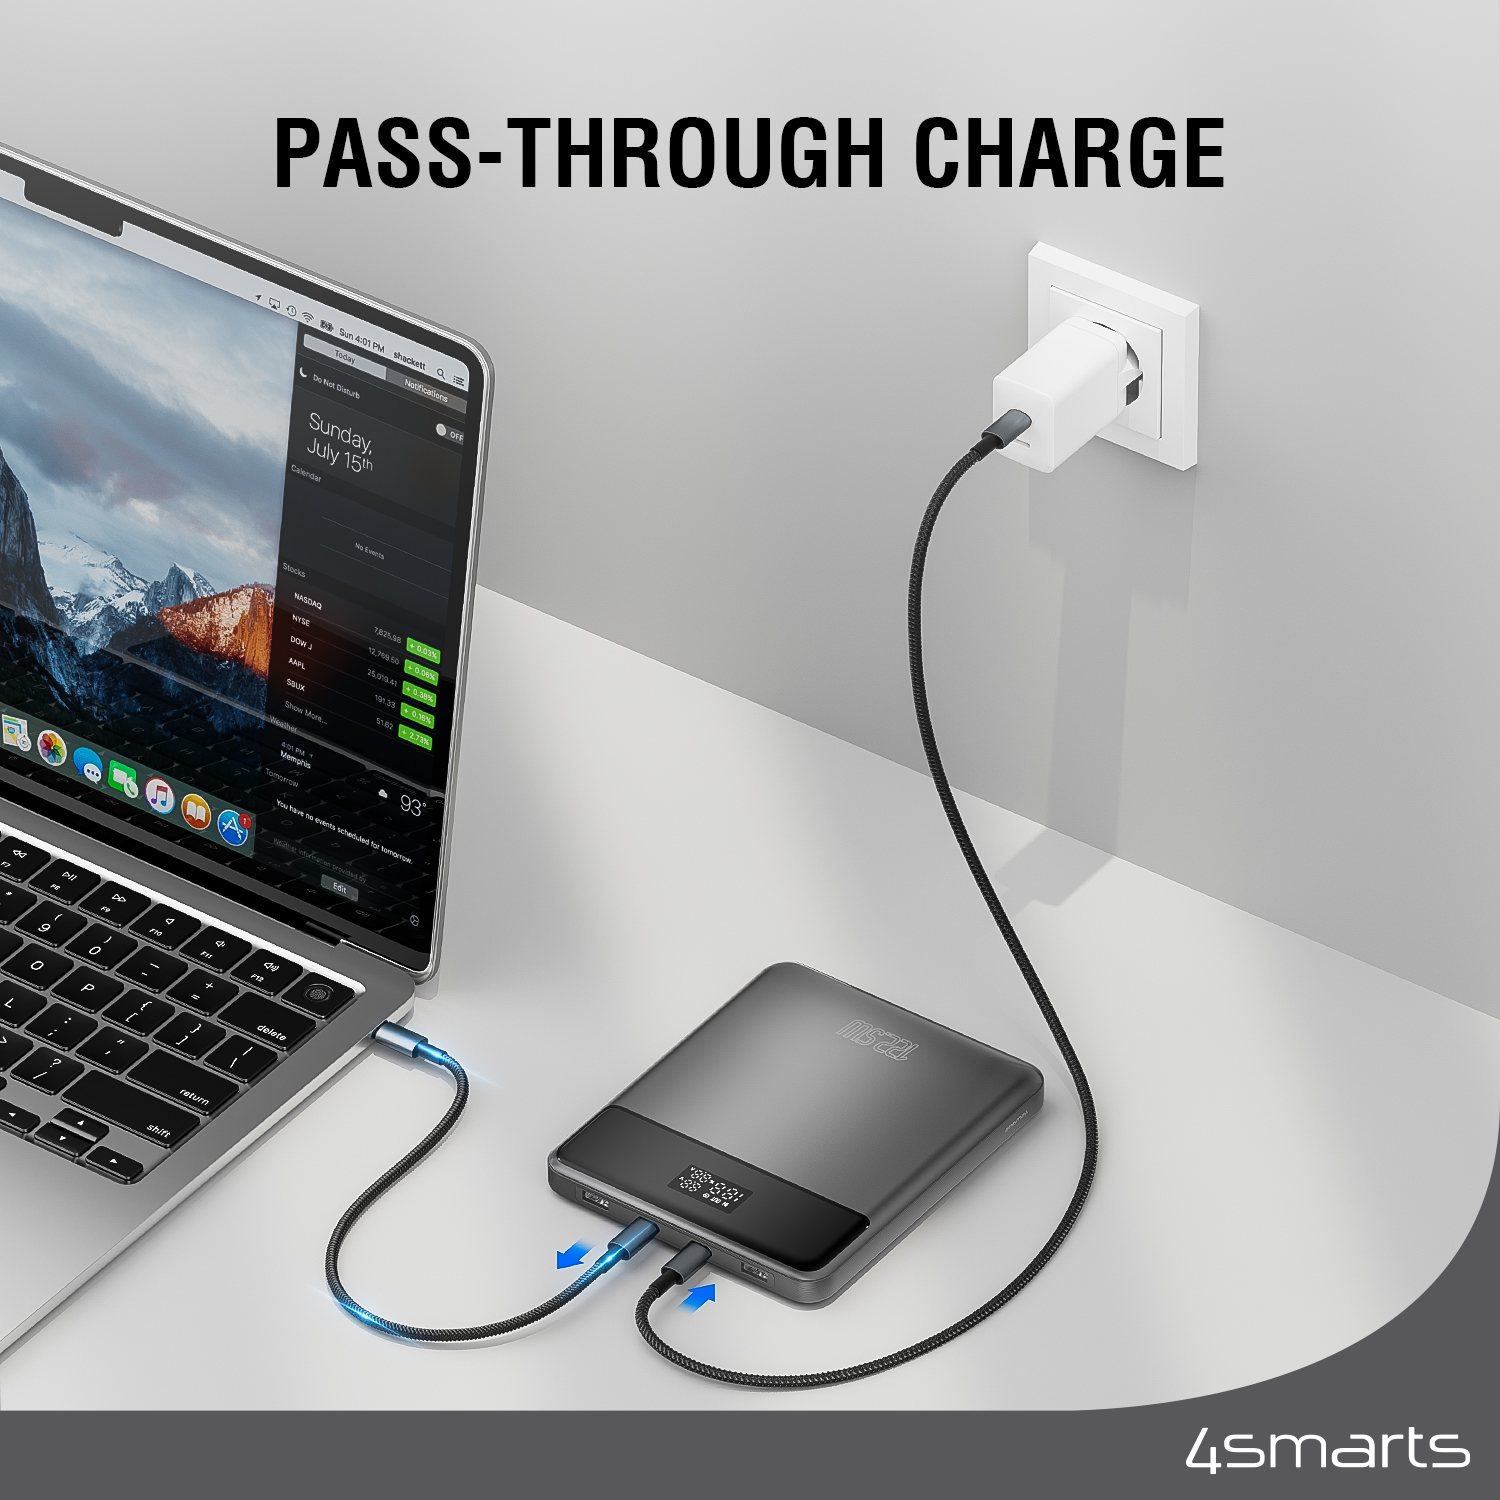 The 4smarts Powerbank Enterprise Slim with the capacity of 20000mAh has also the pass-through charging functionality.